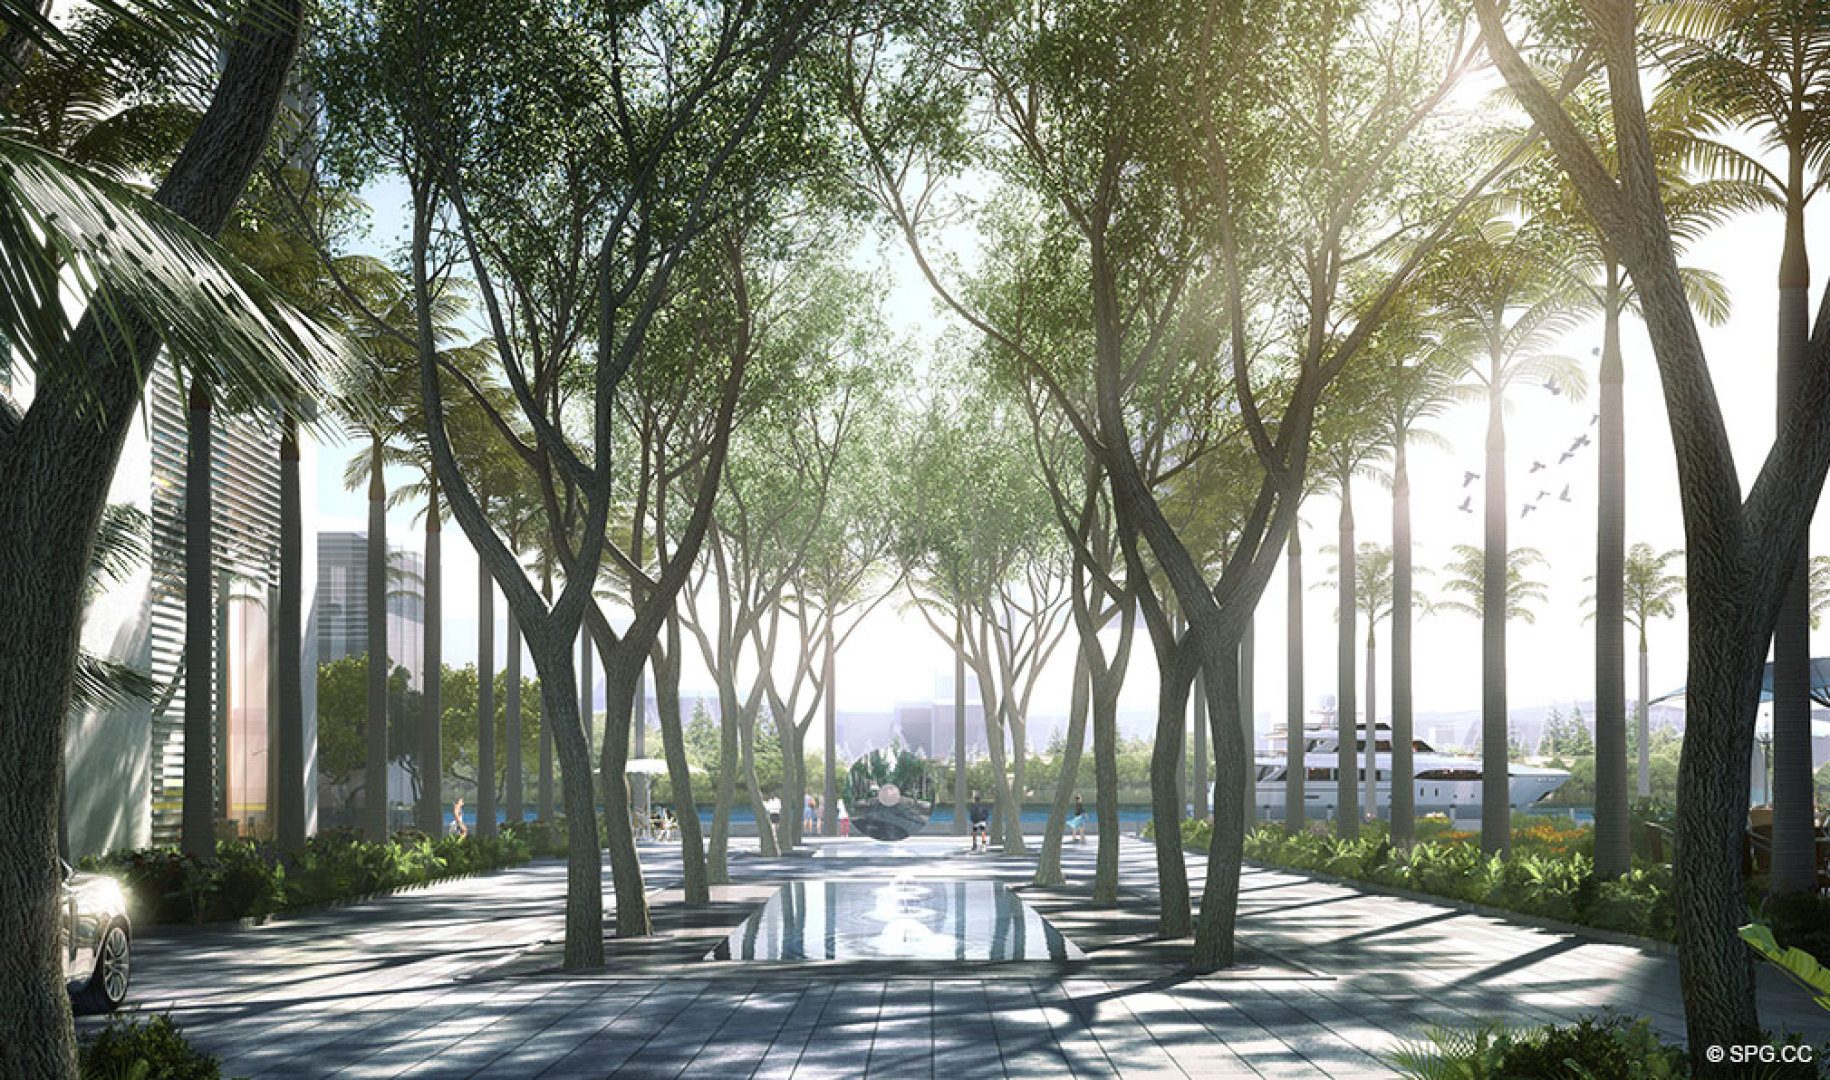 Lush Contemporary Landscaping at One River Point, Luxury Waterfront Condos in Miami, Florida 33130